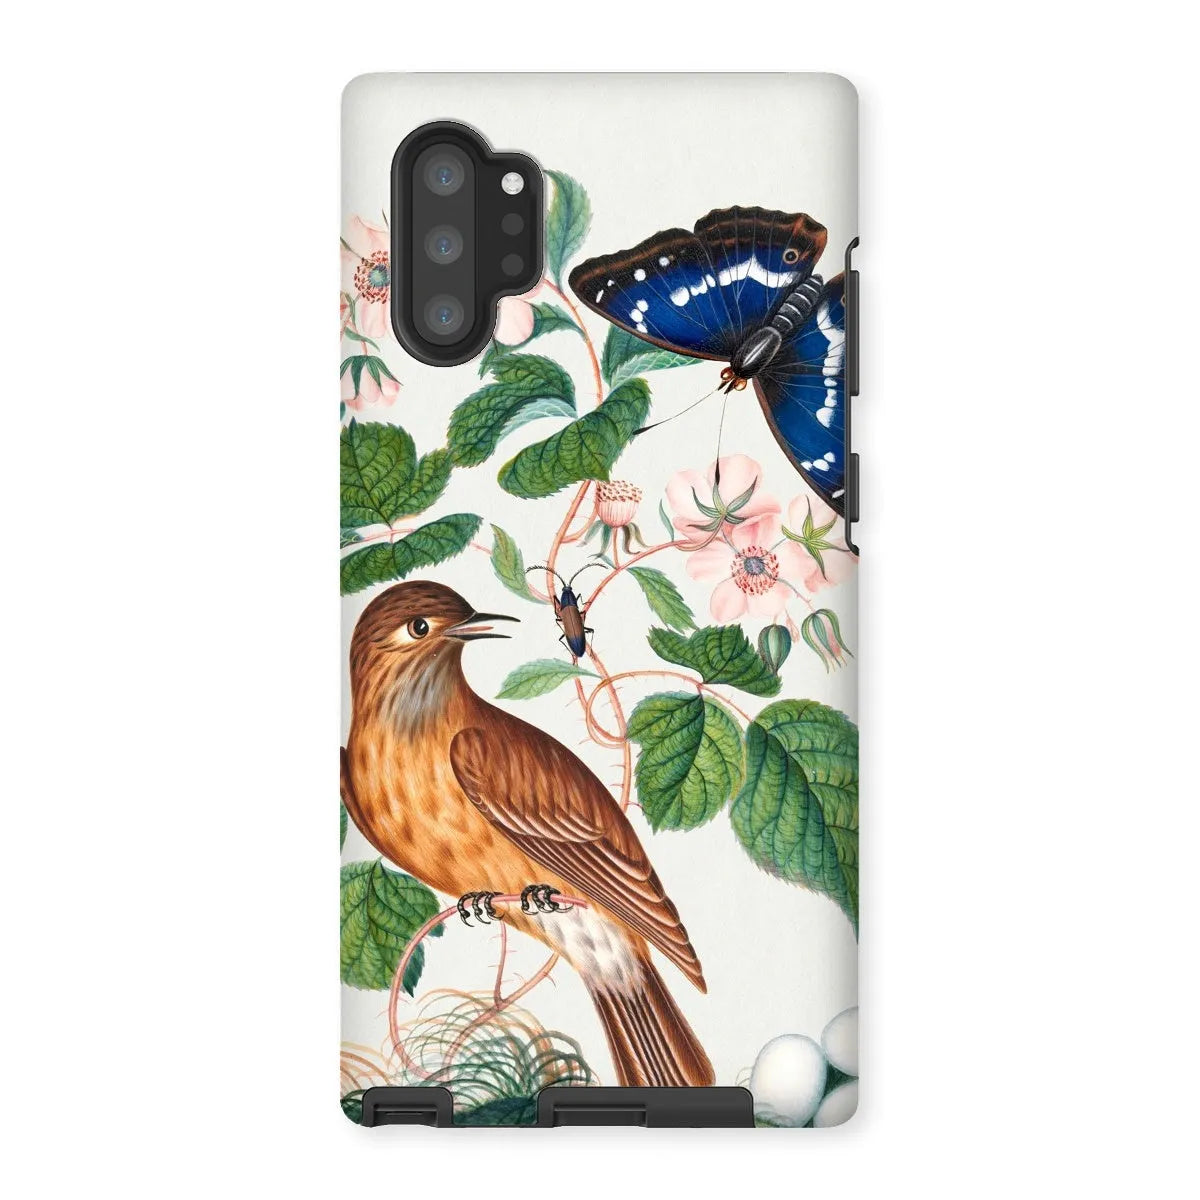 Flycatcher Emperor And Beetle - Art Phone Case - James Bolton - Samsung Galaxy Note 10p / Matte - Mobile Phone Cases